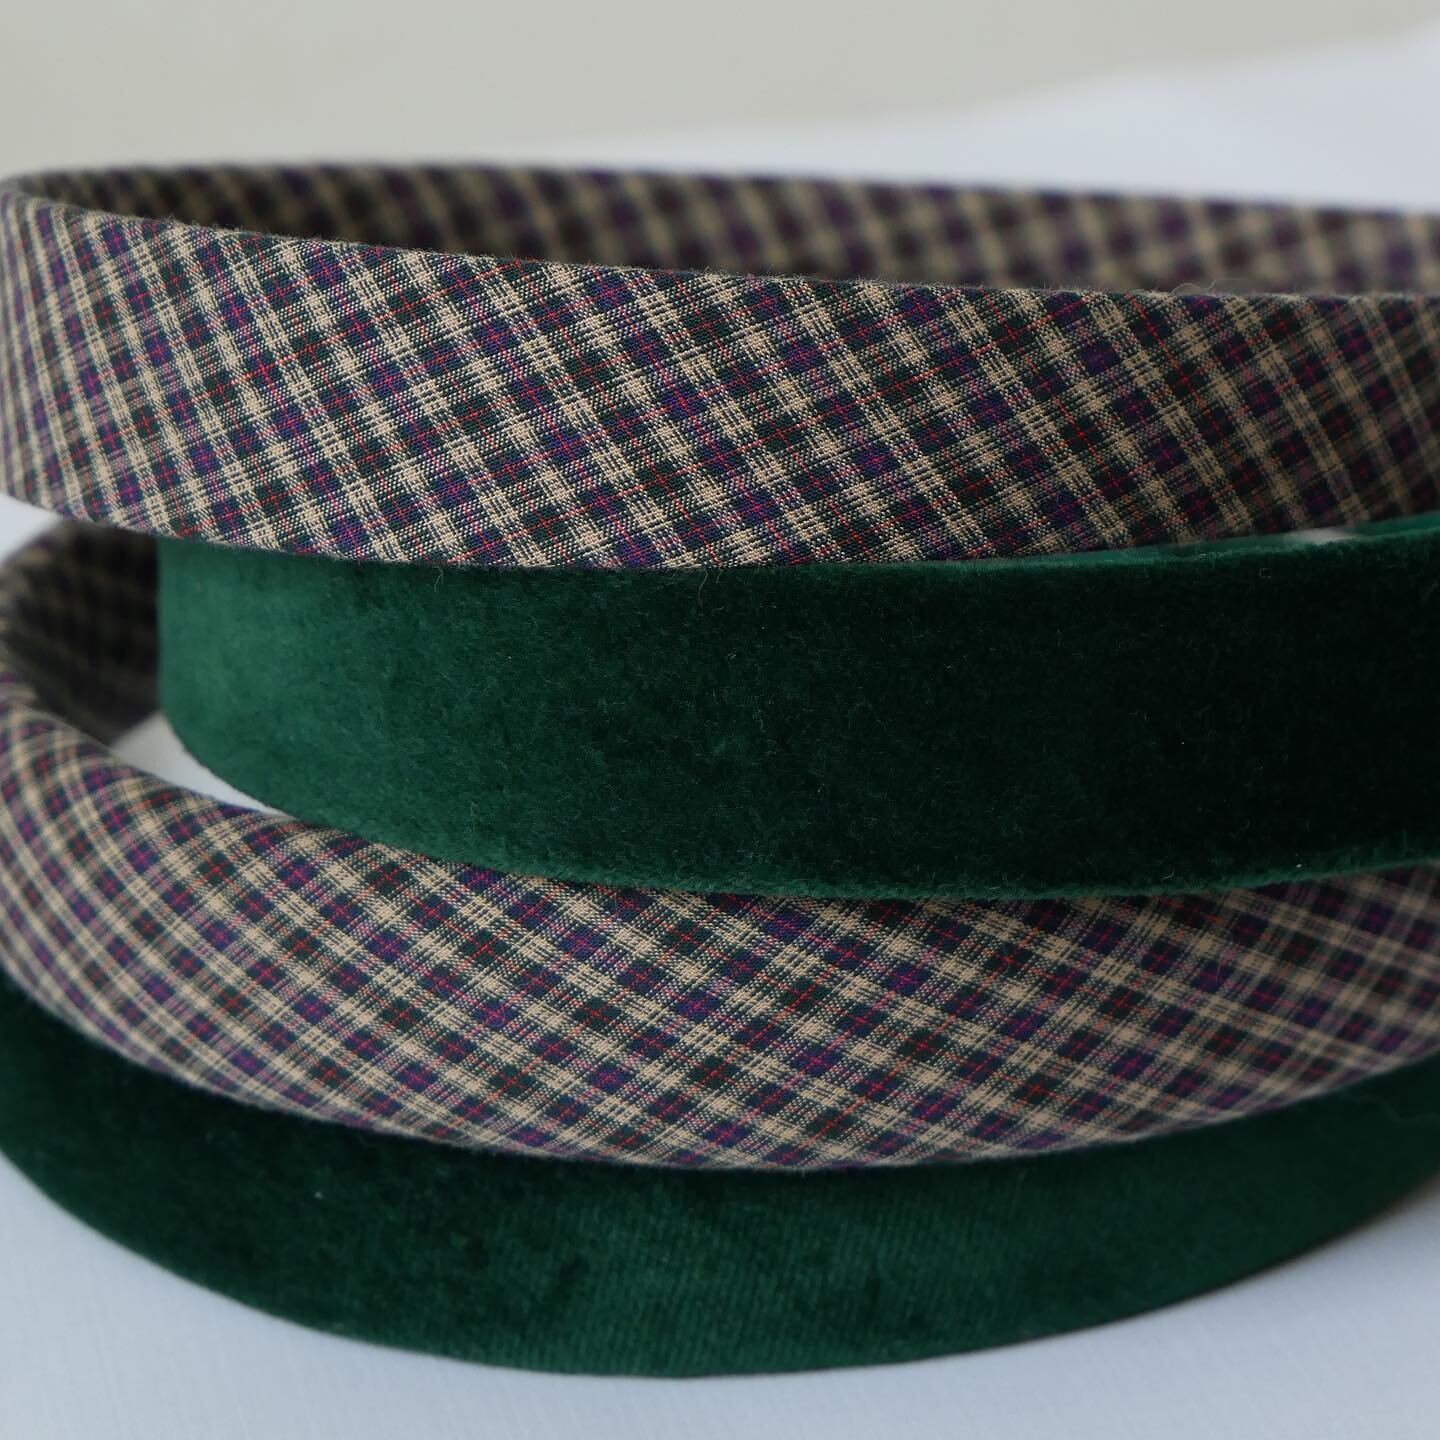 Pre-orders live on our site at 8 AM EST, link in bio! 👏🏽👏🏽👏🏽

Shop The Newbury &amp; The Stratton from the Uniform Collection 

Orders ship 10/10
.
.
.
.
.
.
#headband #headbands #fall #fallaccessories #ootd #ootdfashion #greenvelvet #plaid #he